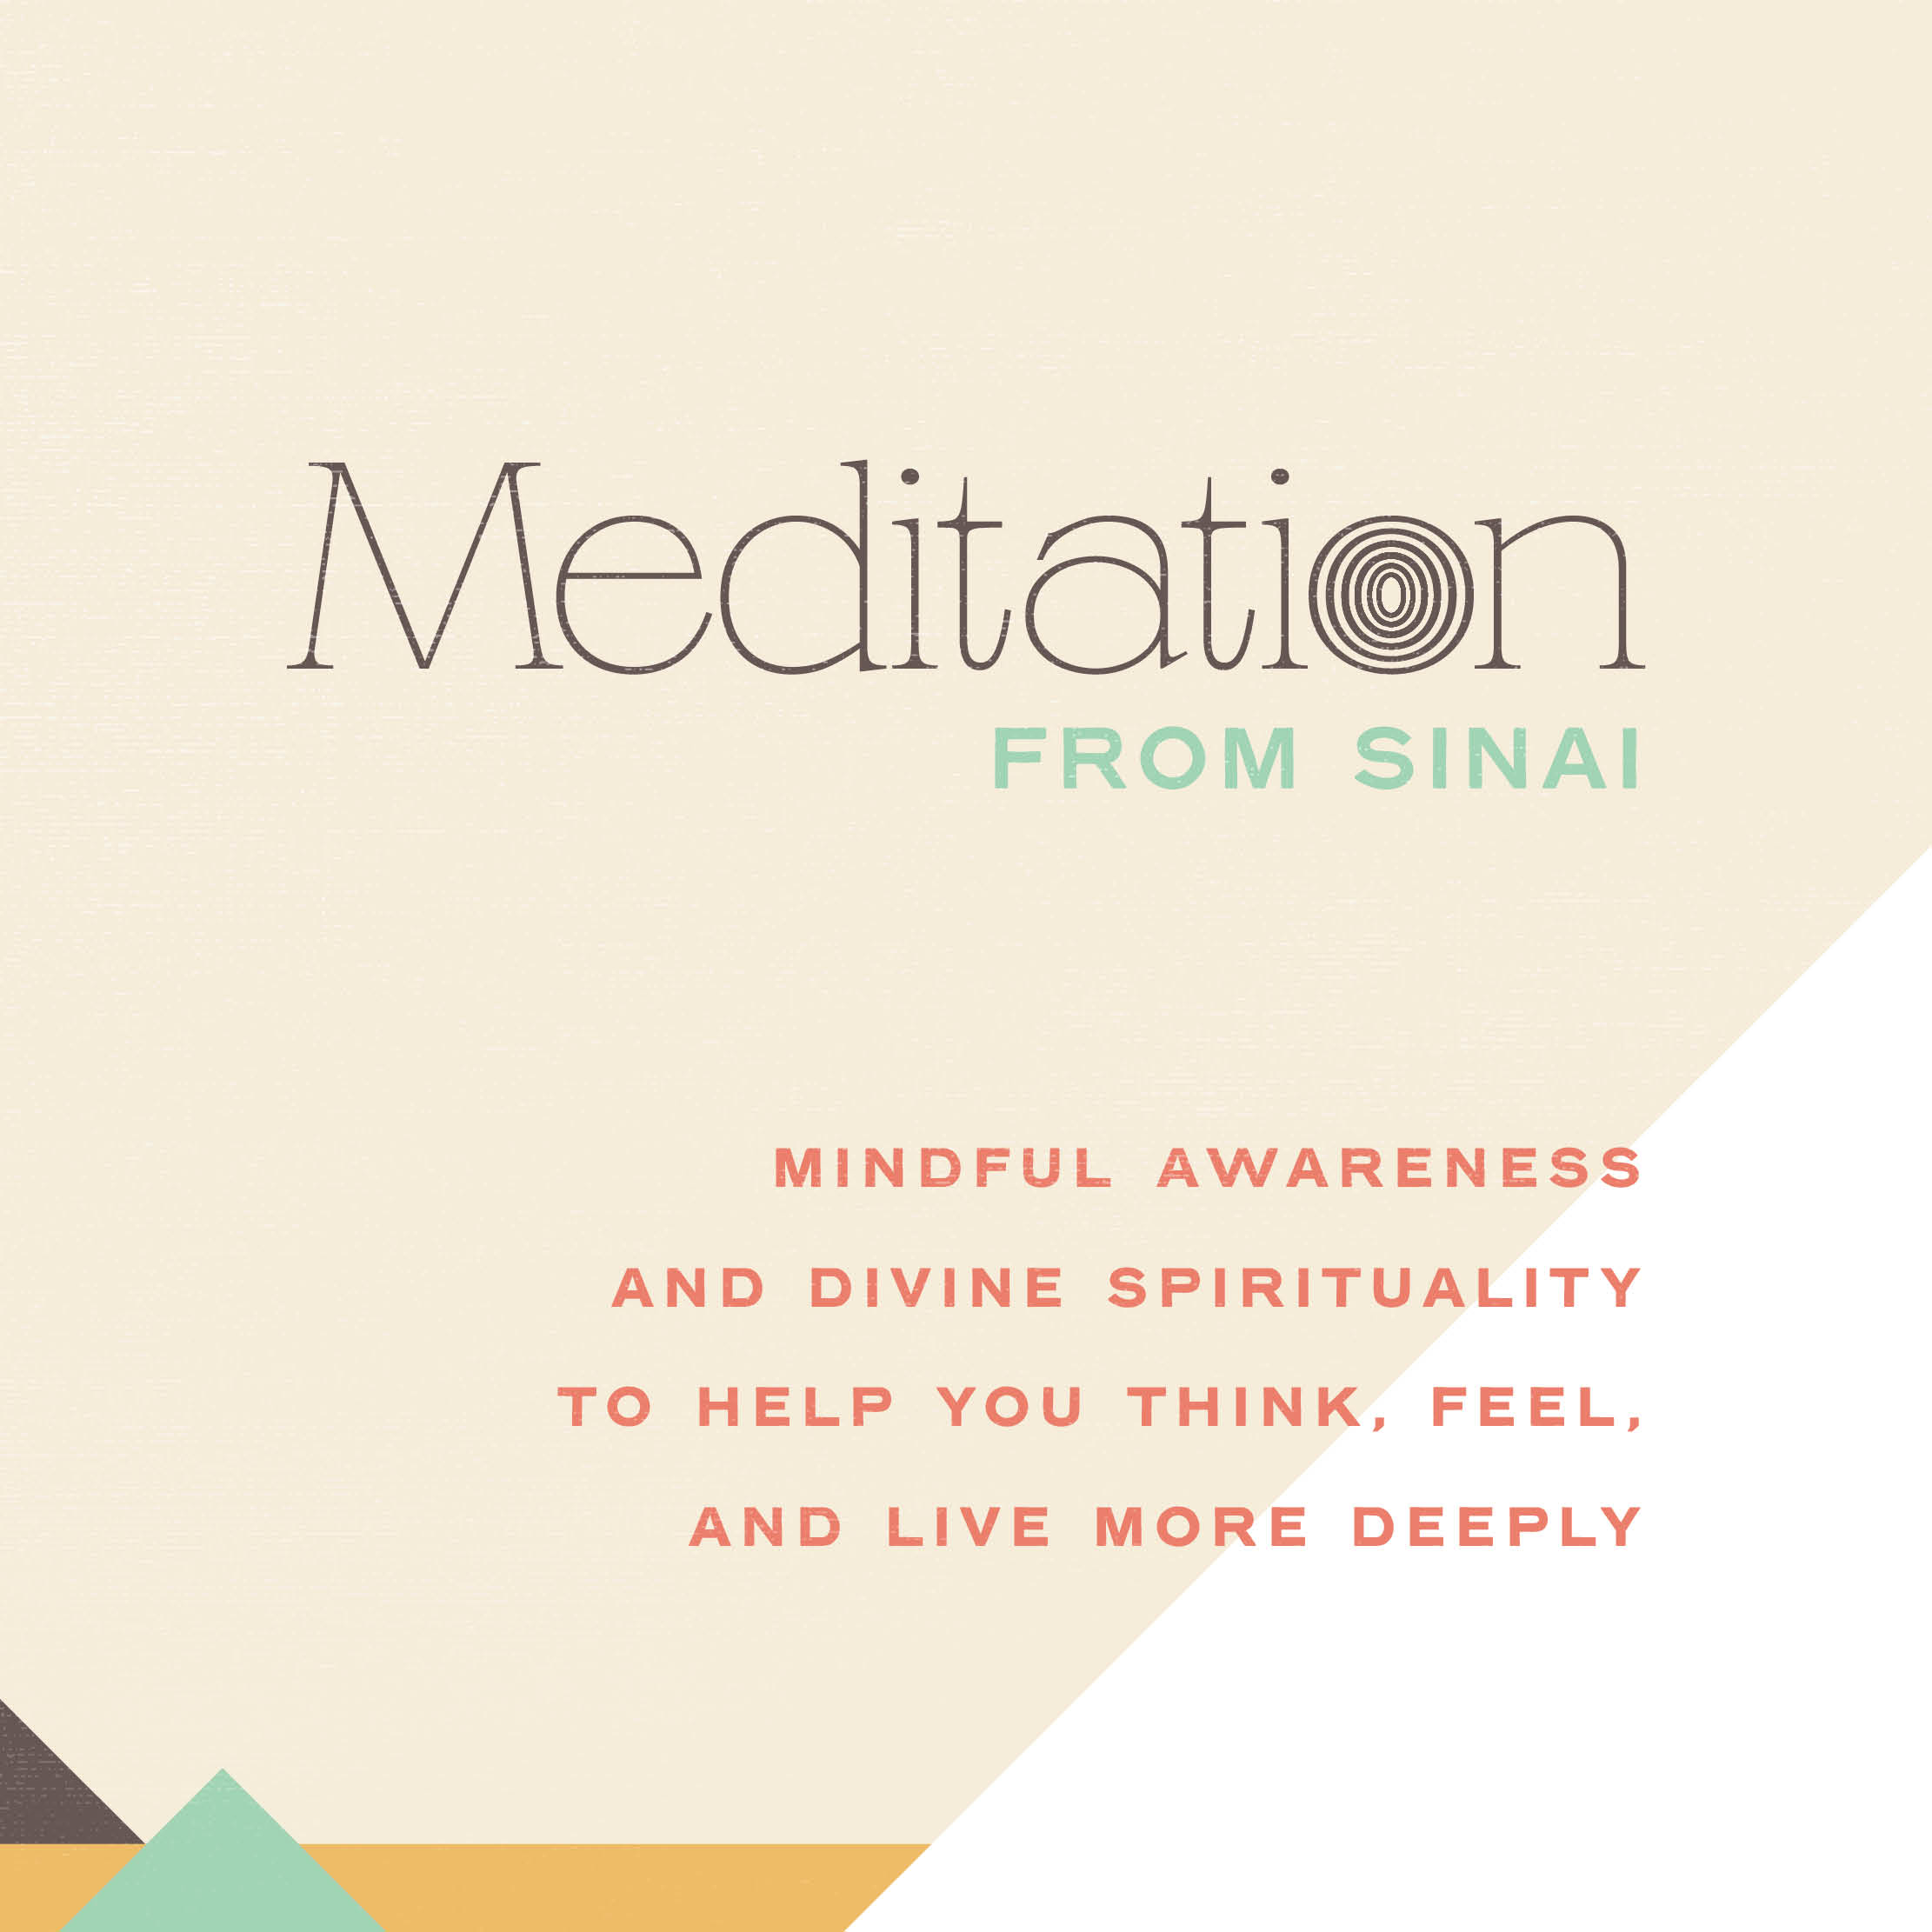 Meditation from Sinai: Mindful Awareness and Divine Spirituality to Help You Think, Feel, and Live More Deeply